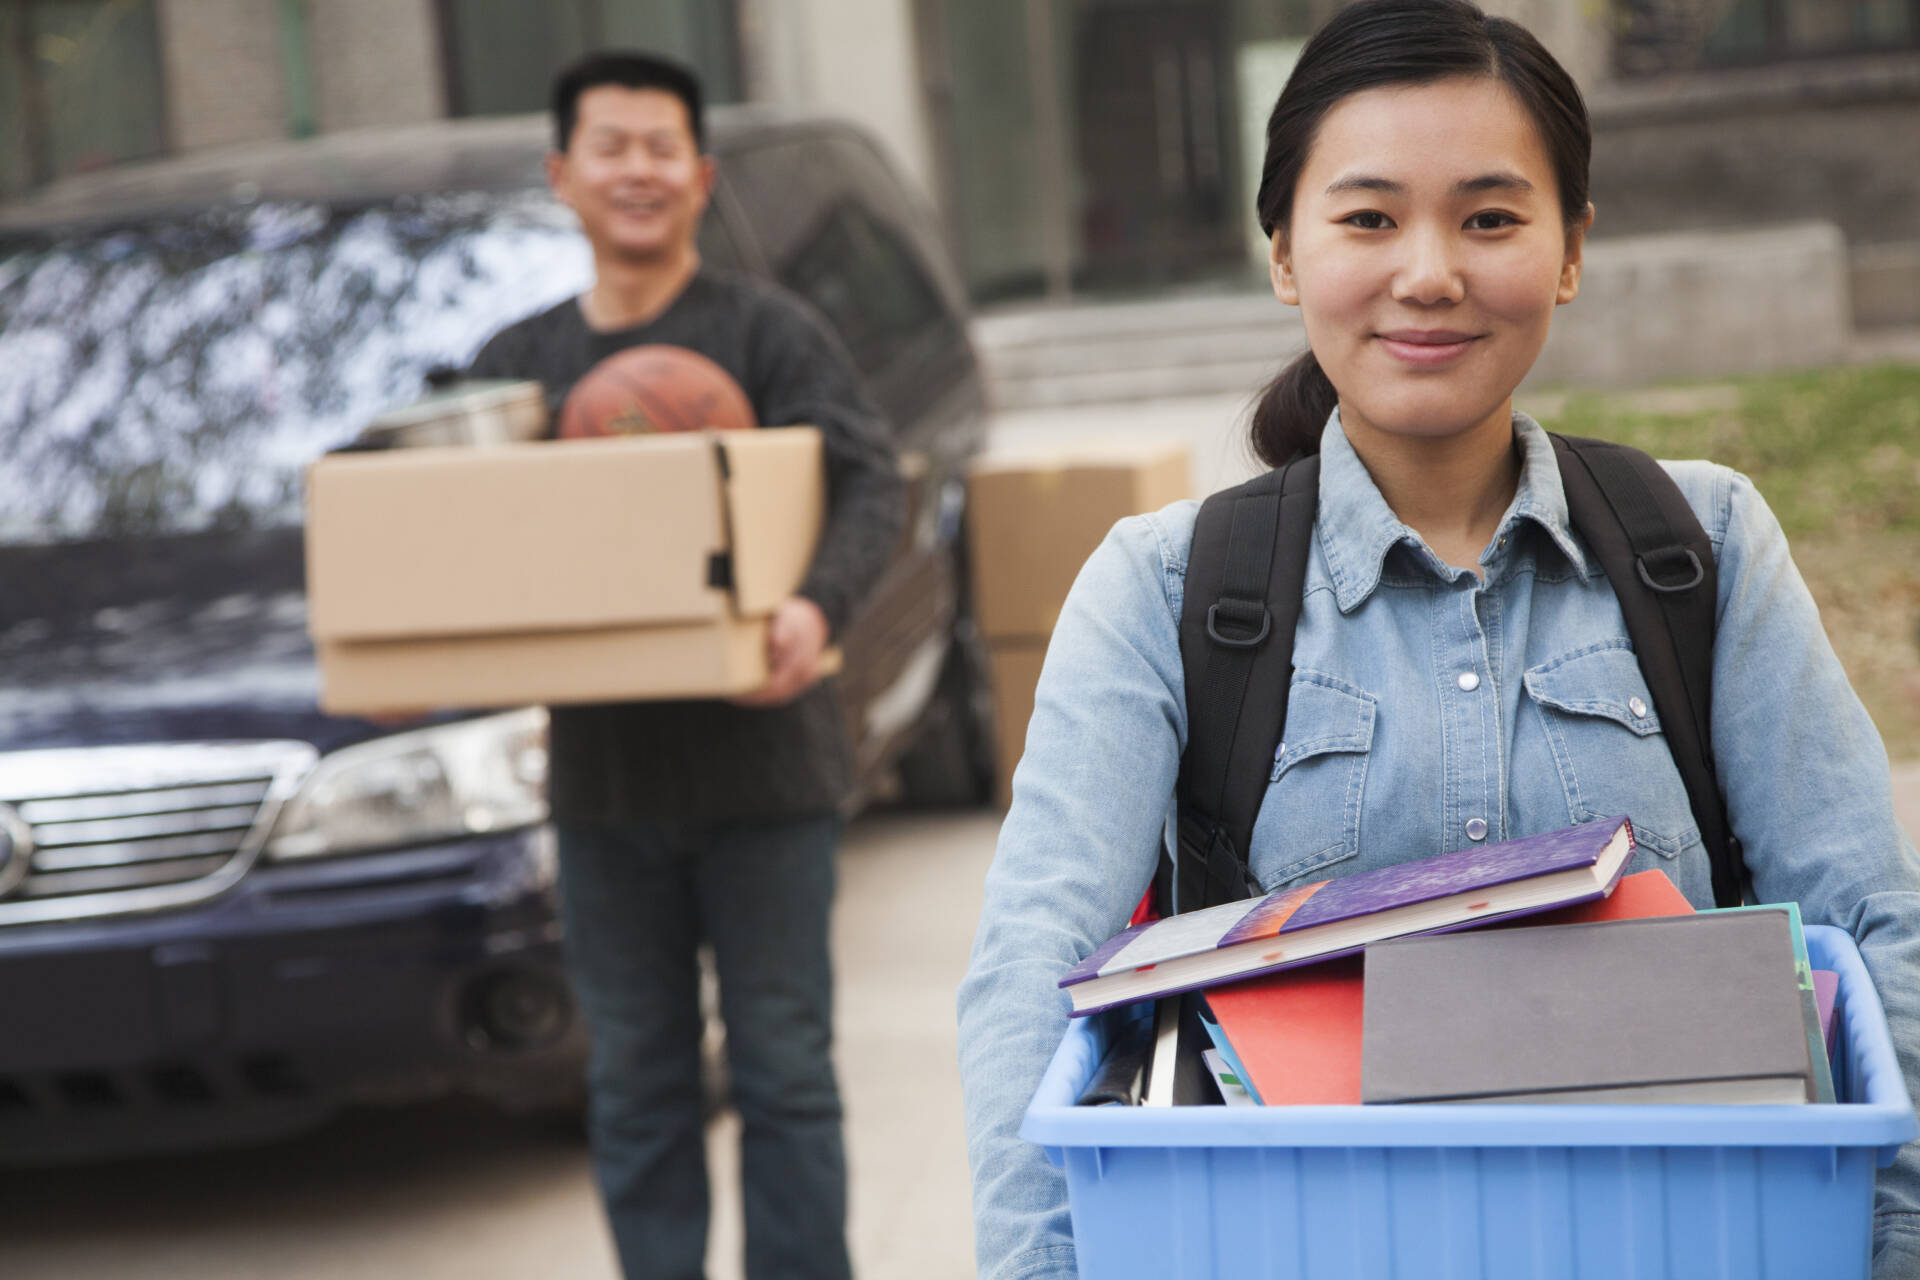 Female student carrying a box of books with father carrying another box from a car in the background